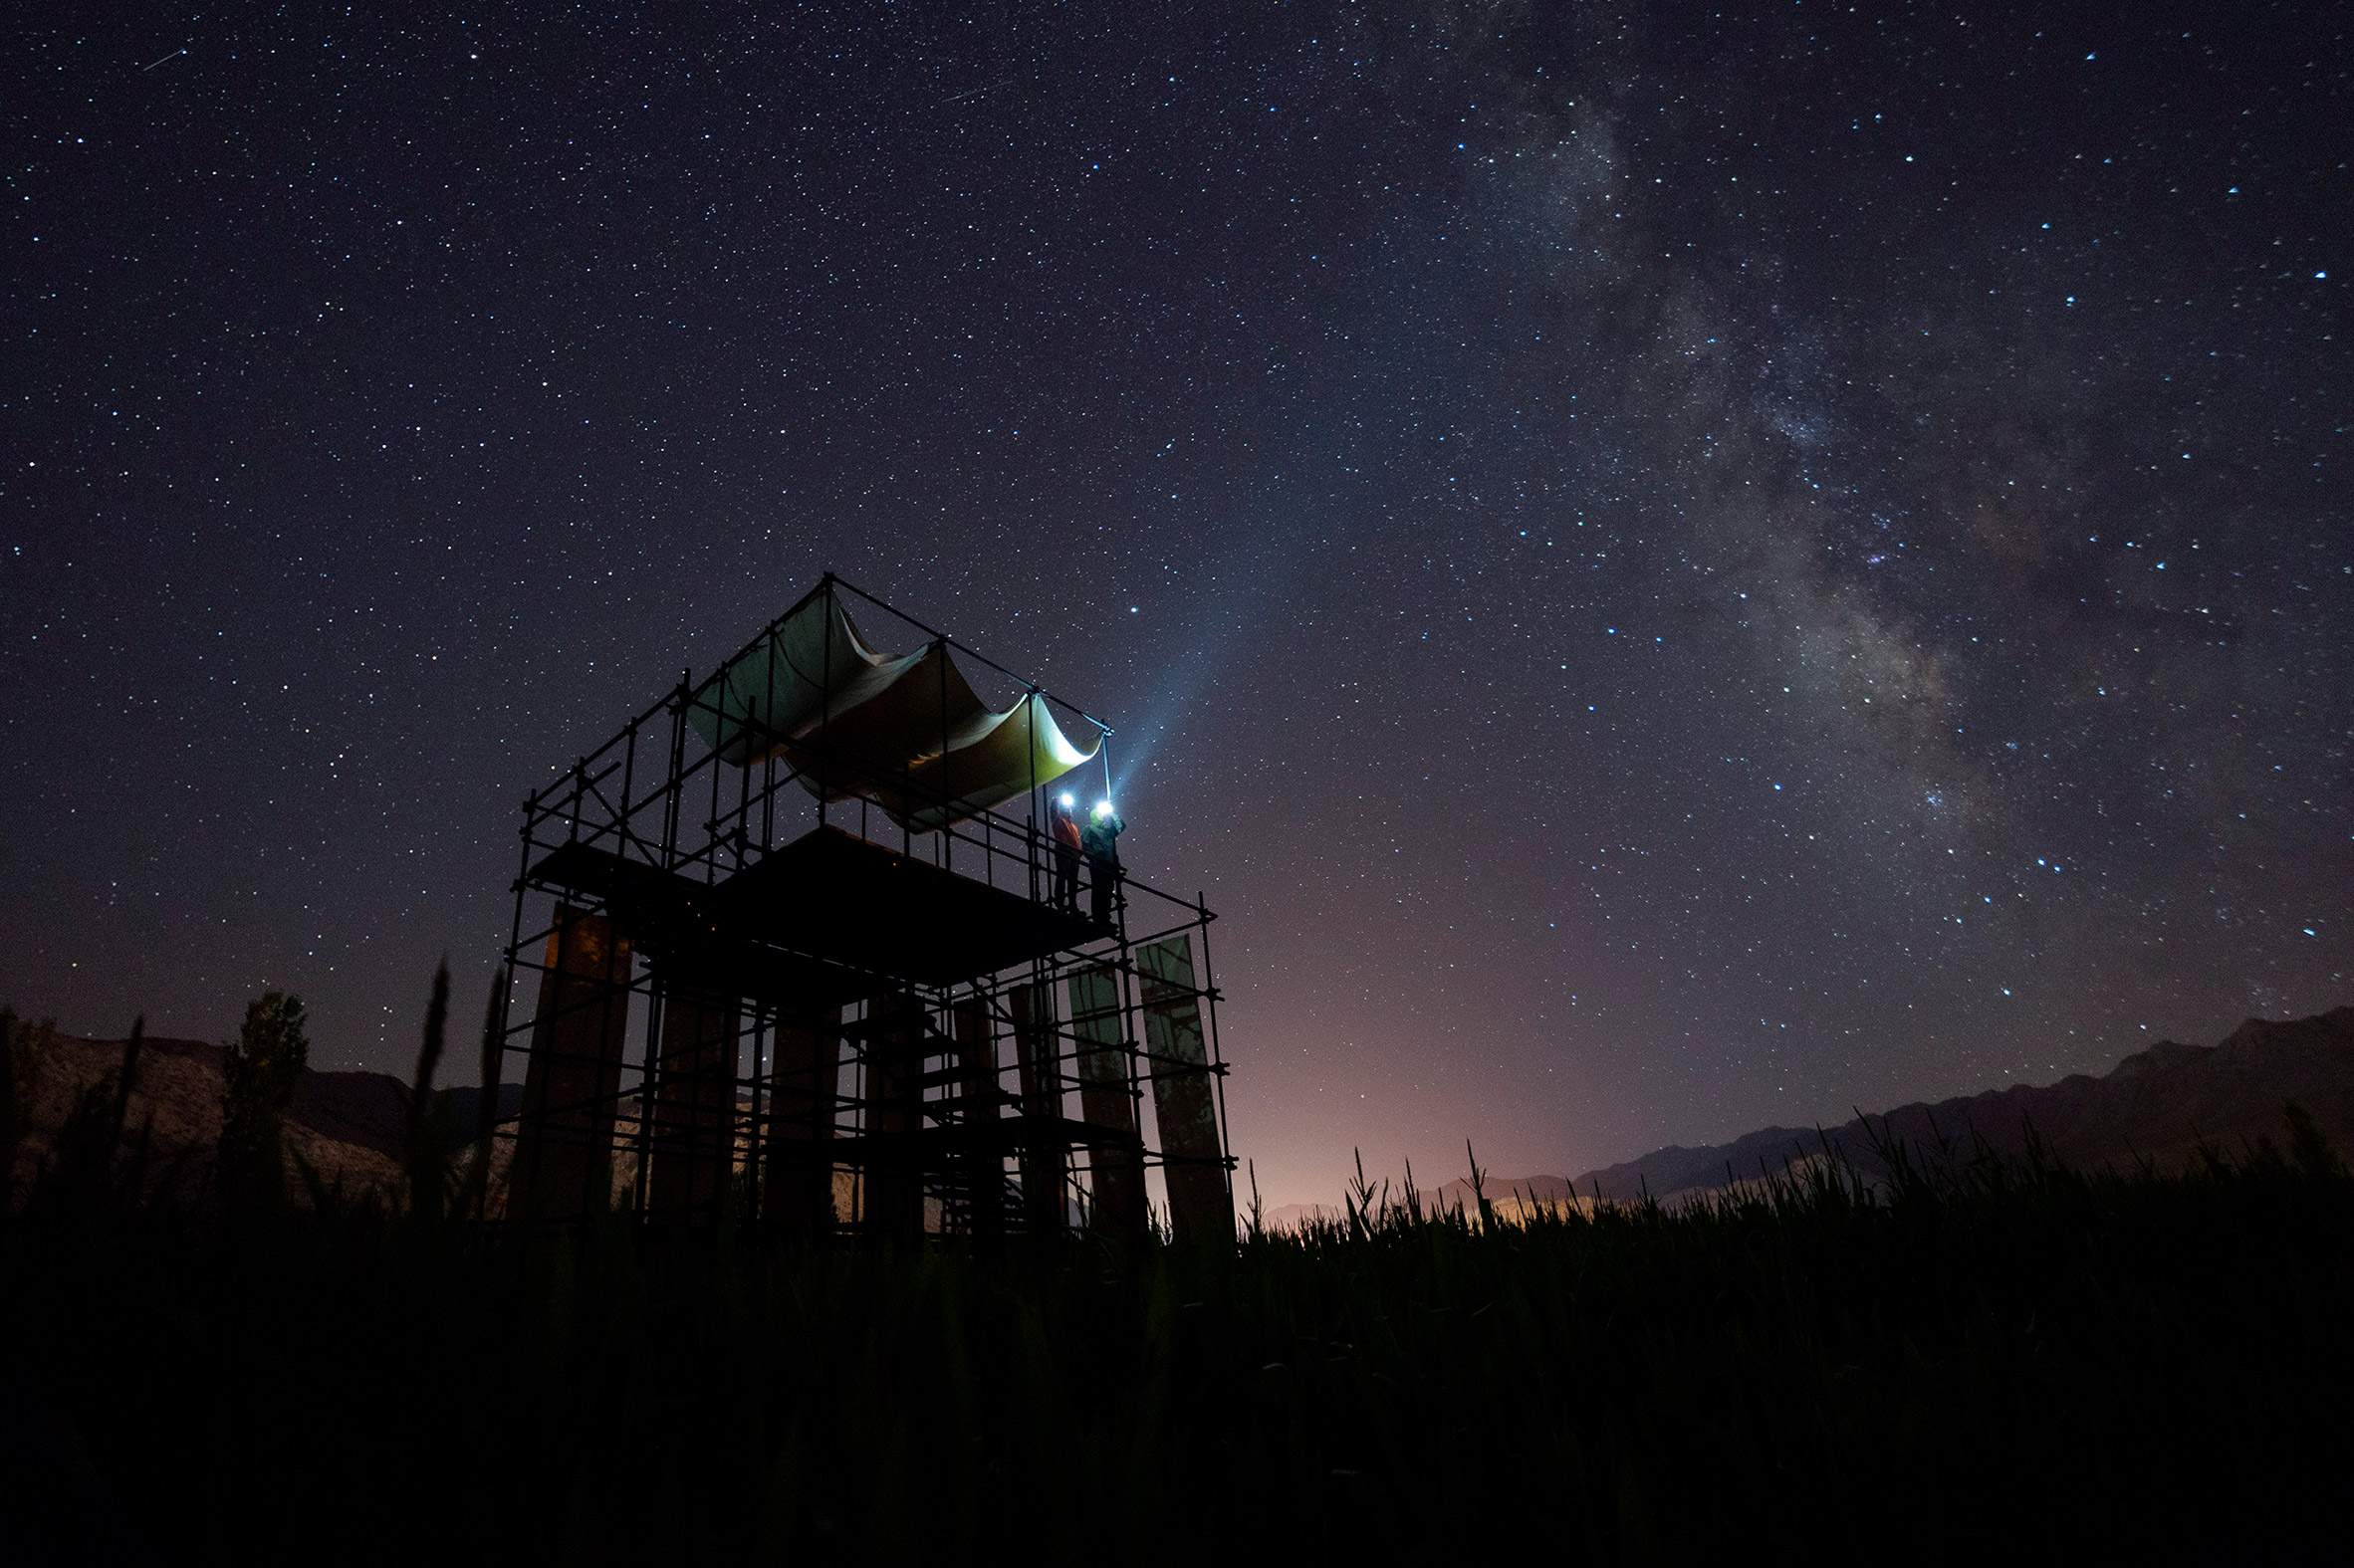 A platform on an eco-lodge at night